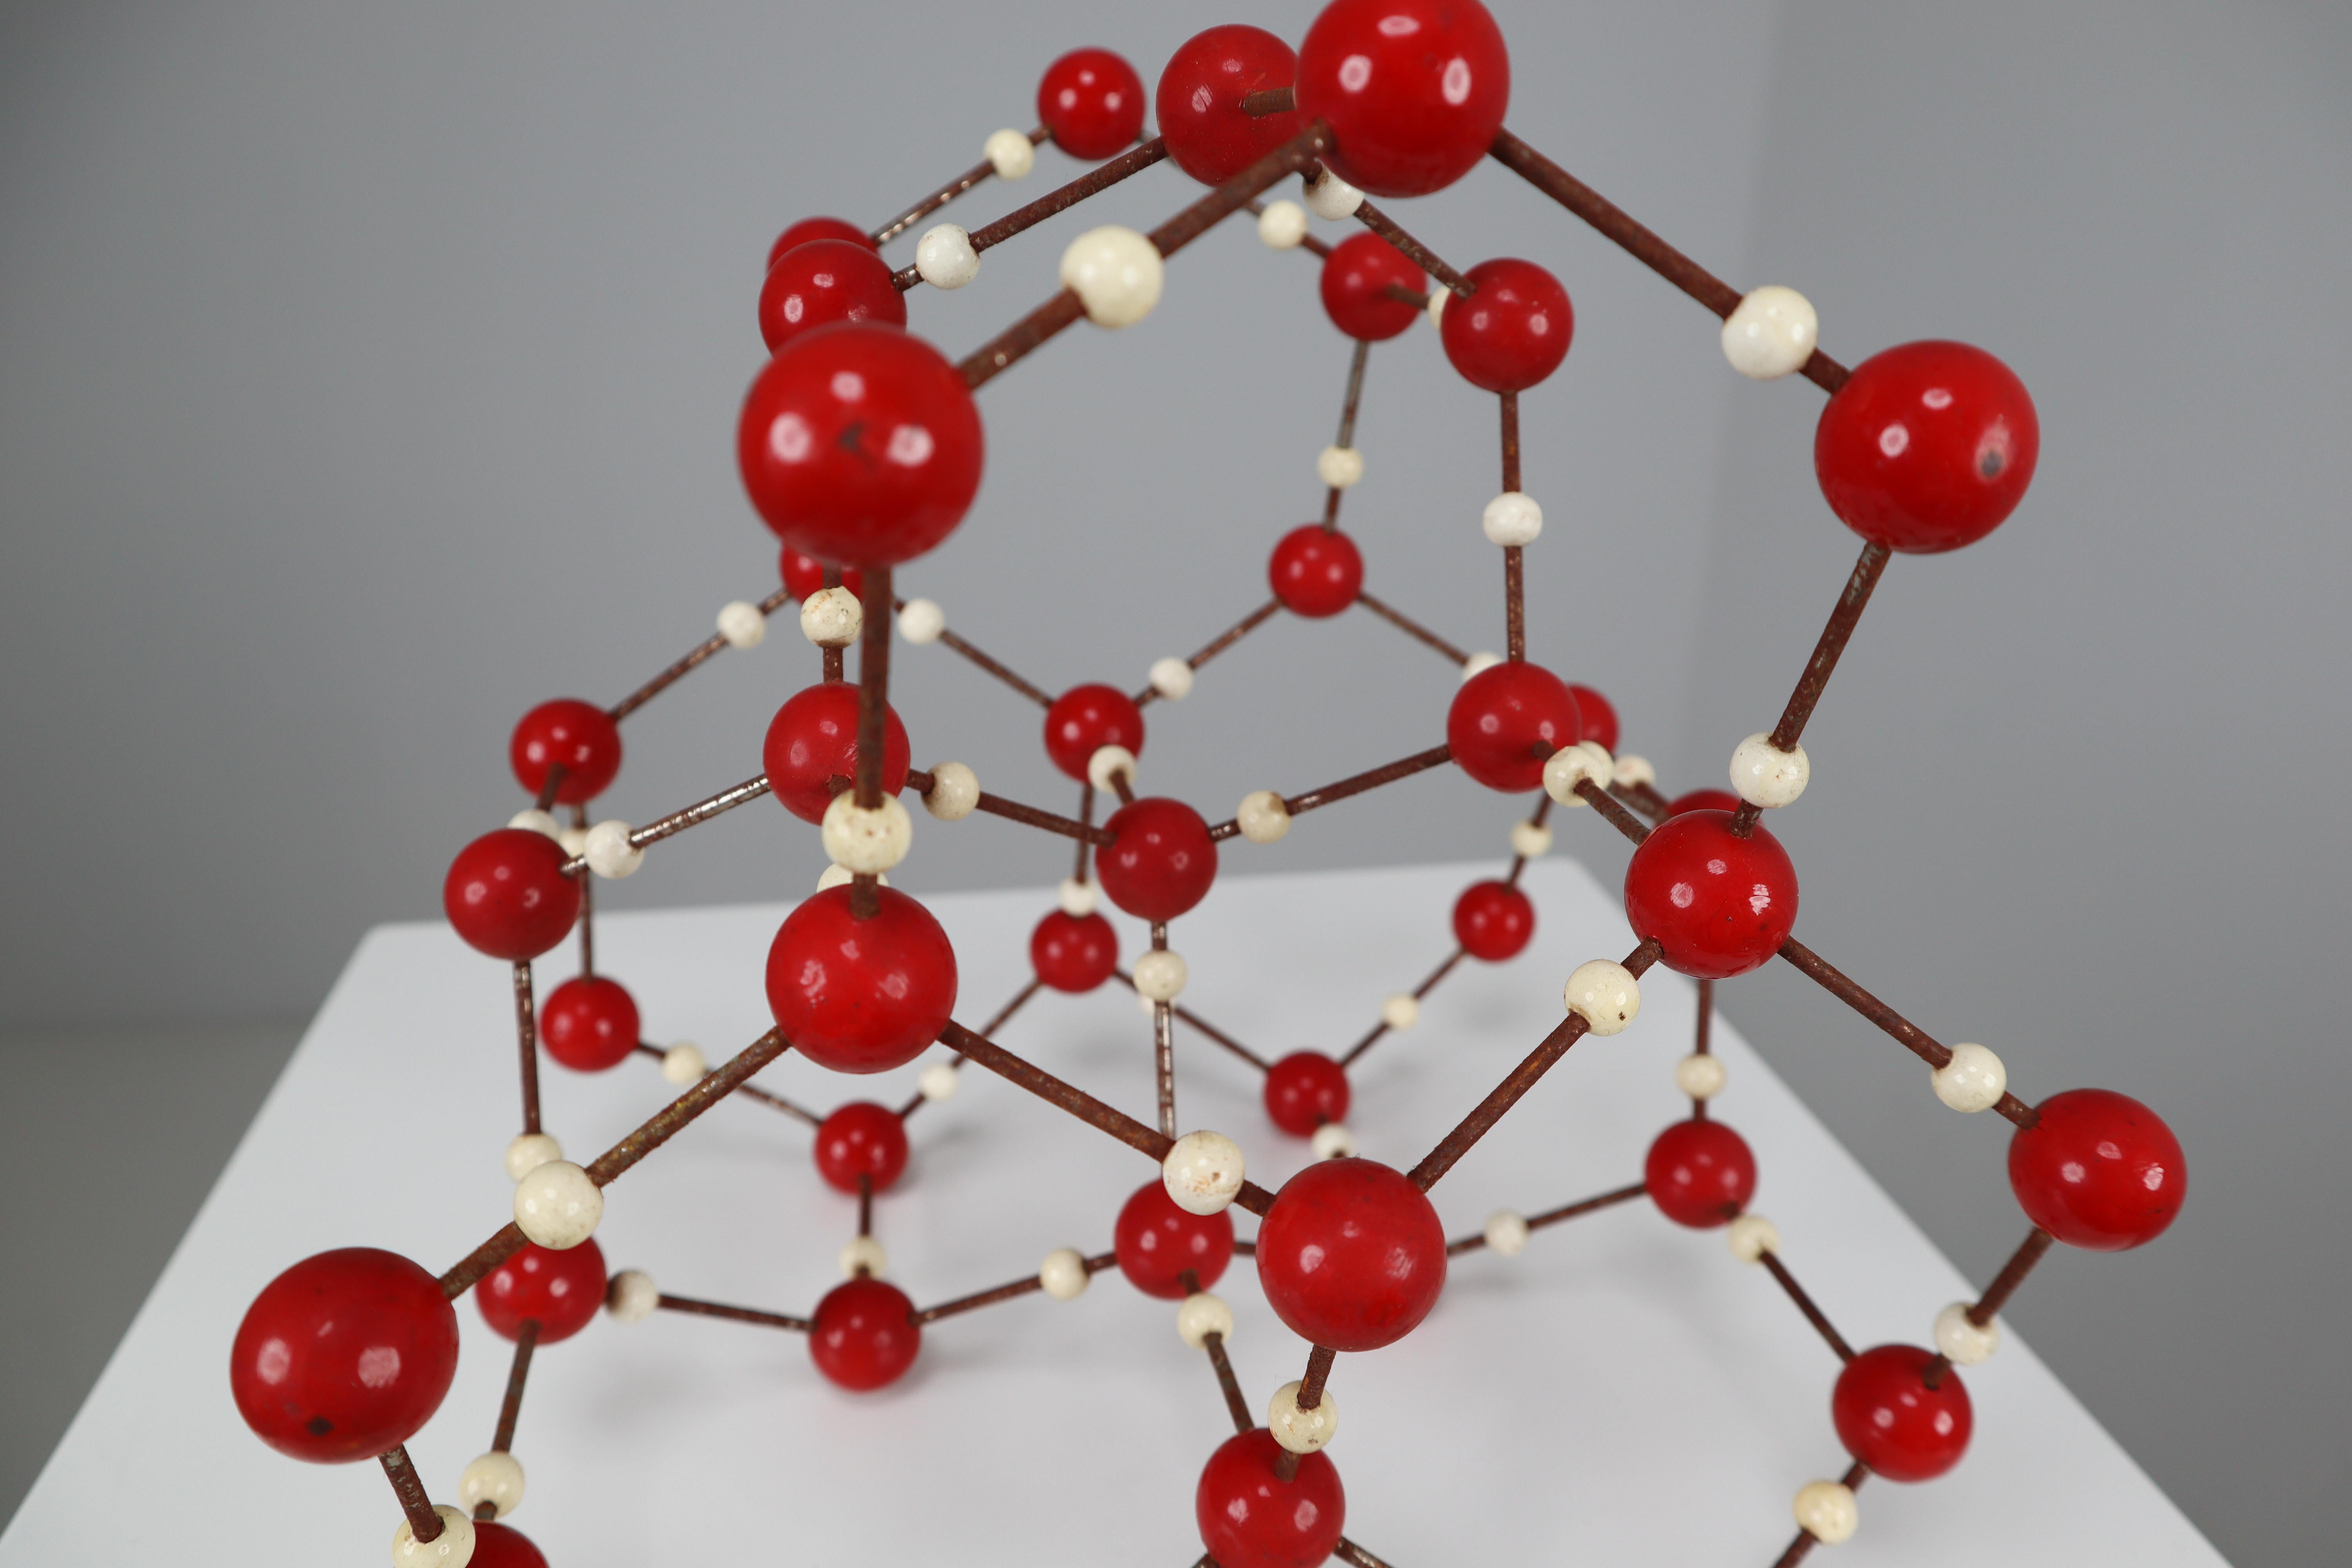 Mid-Century Modern Mid-Century Molecular Structure for Didactic Purposes Made in the 1950s